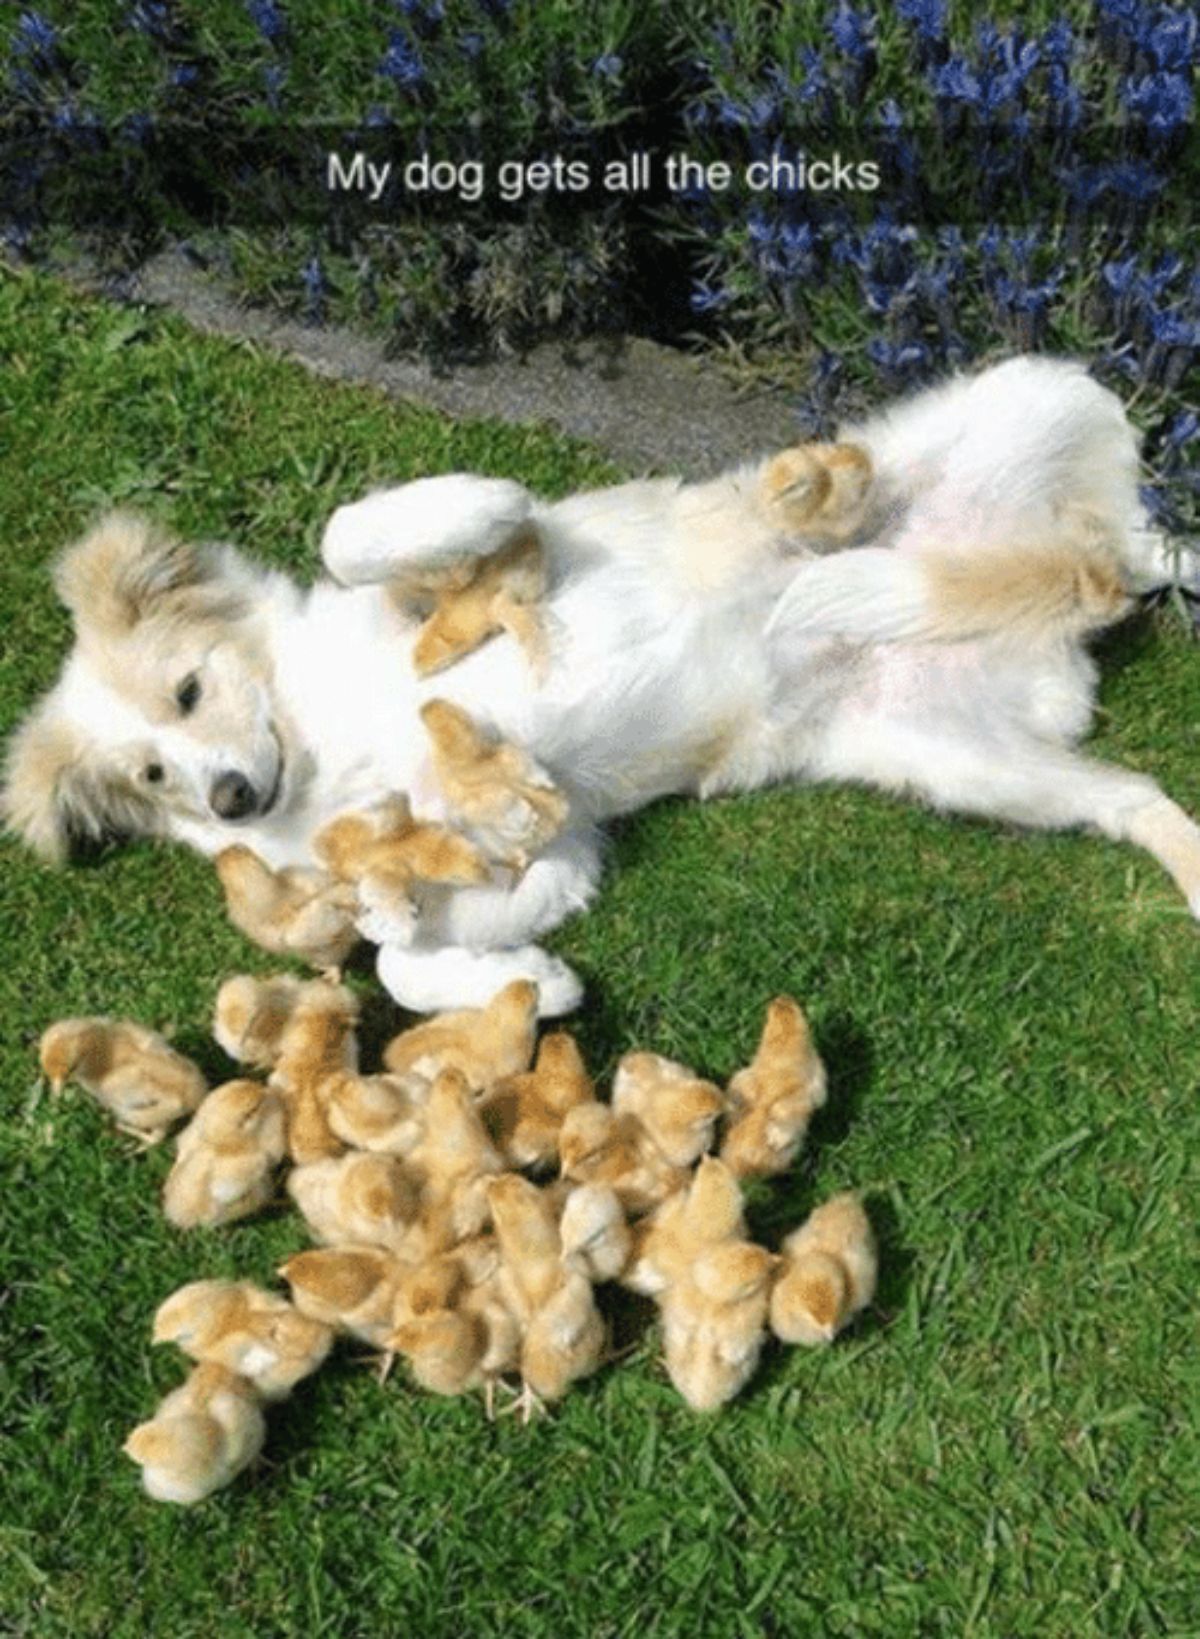 fluffy brown and white dog laying belly up on grass surrounded by yellow chicks